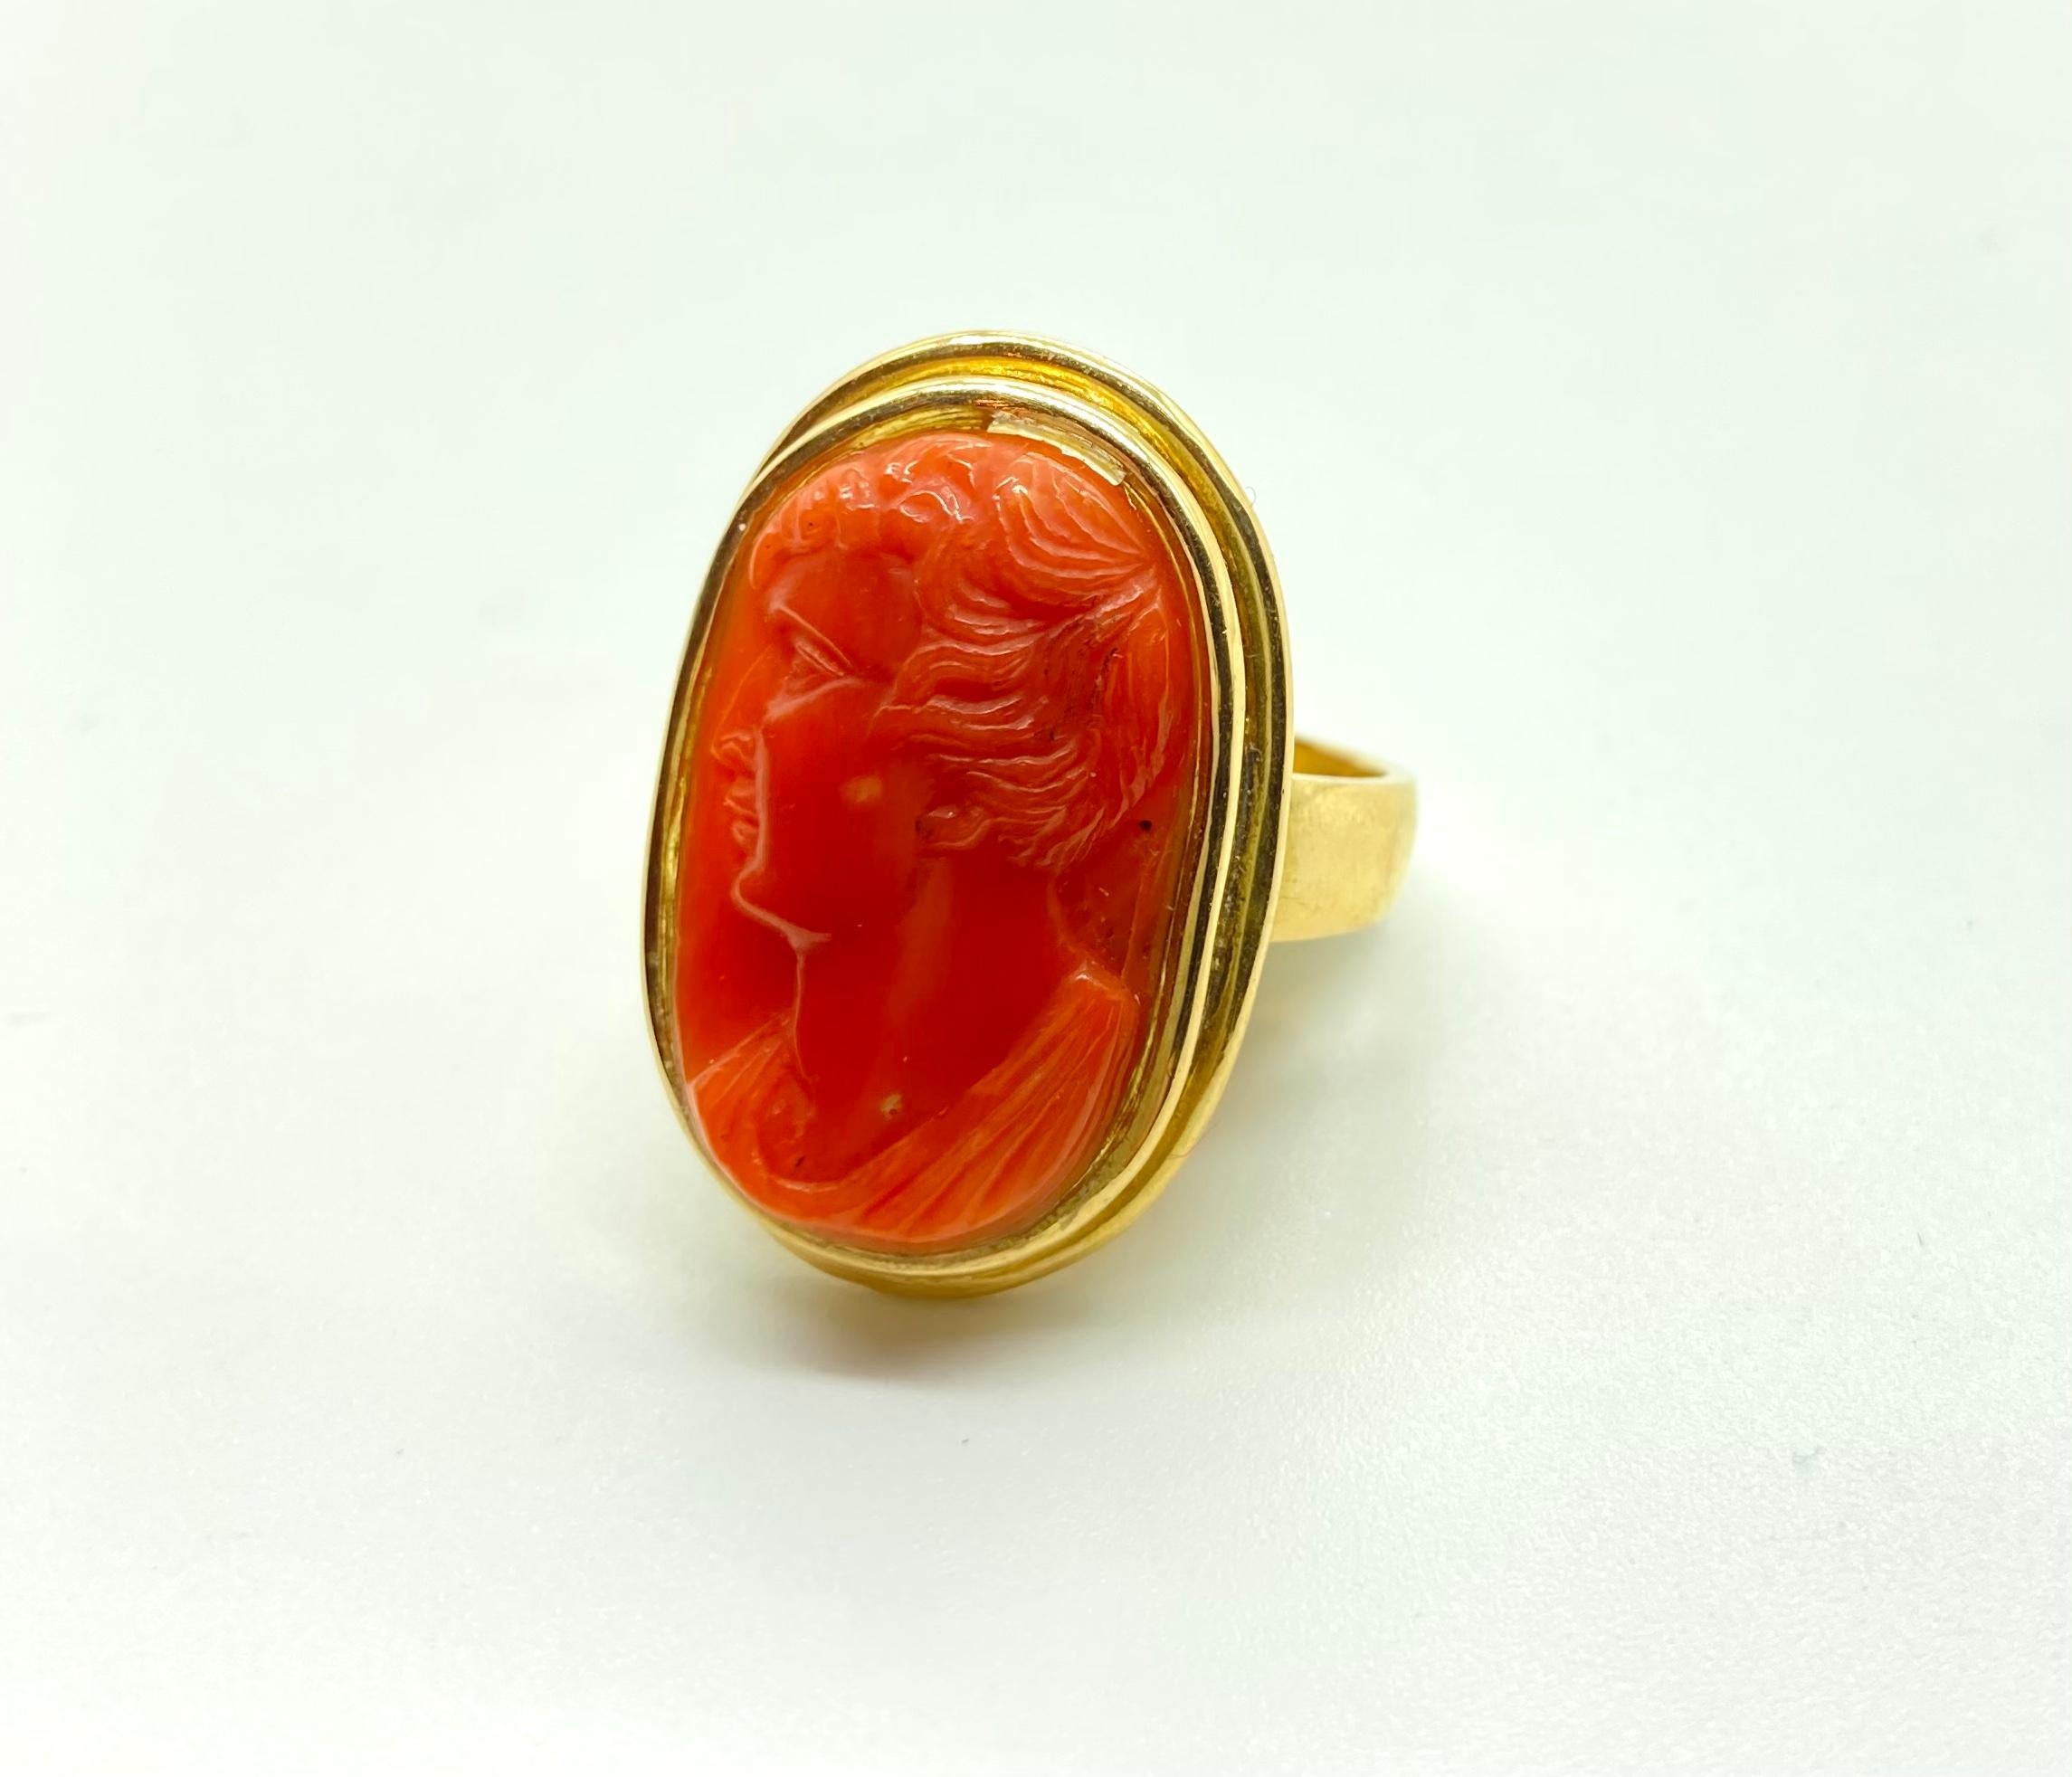 A chic yellow gold ring featuring a carved coral cameo of a gentleman’s profile. Circa late nineteenth century. Made in Italy.